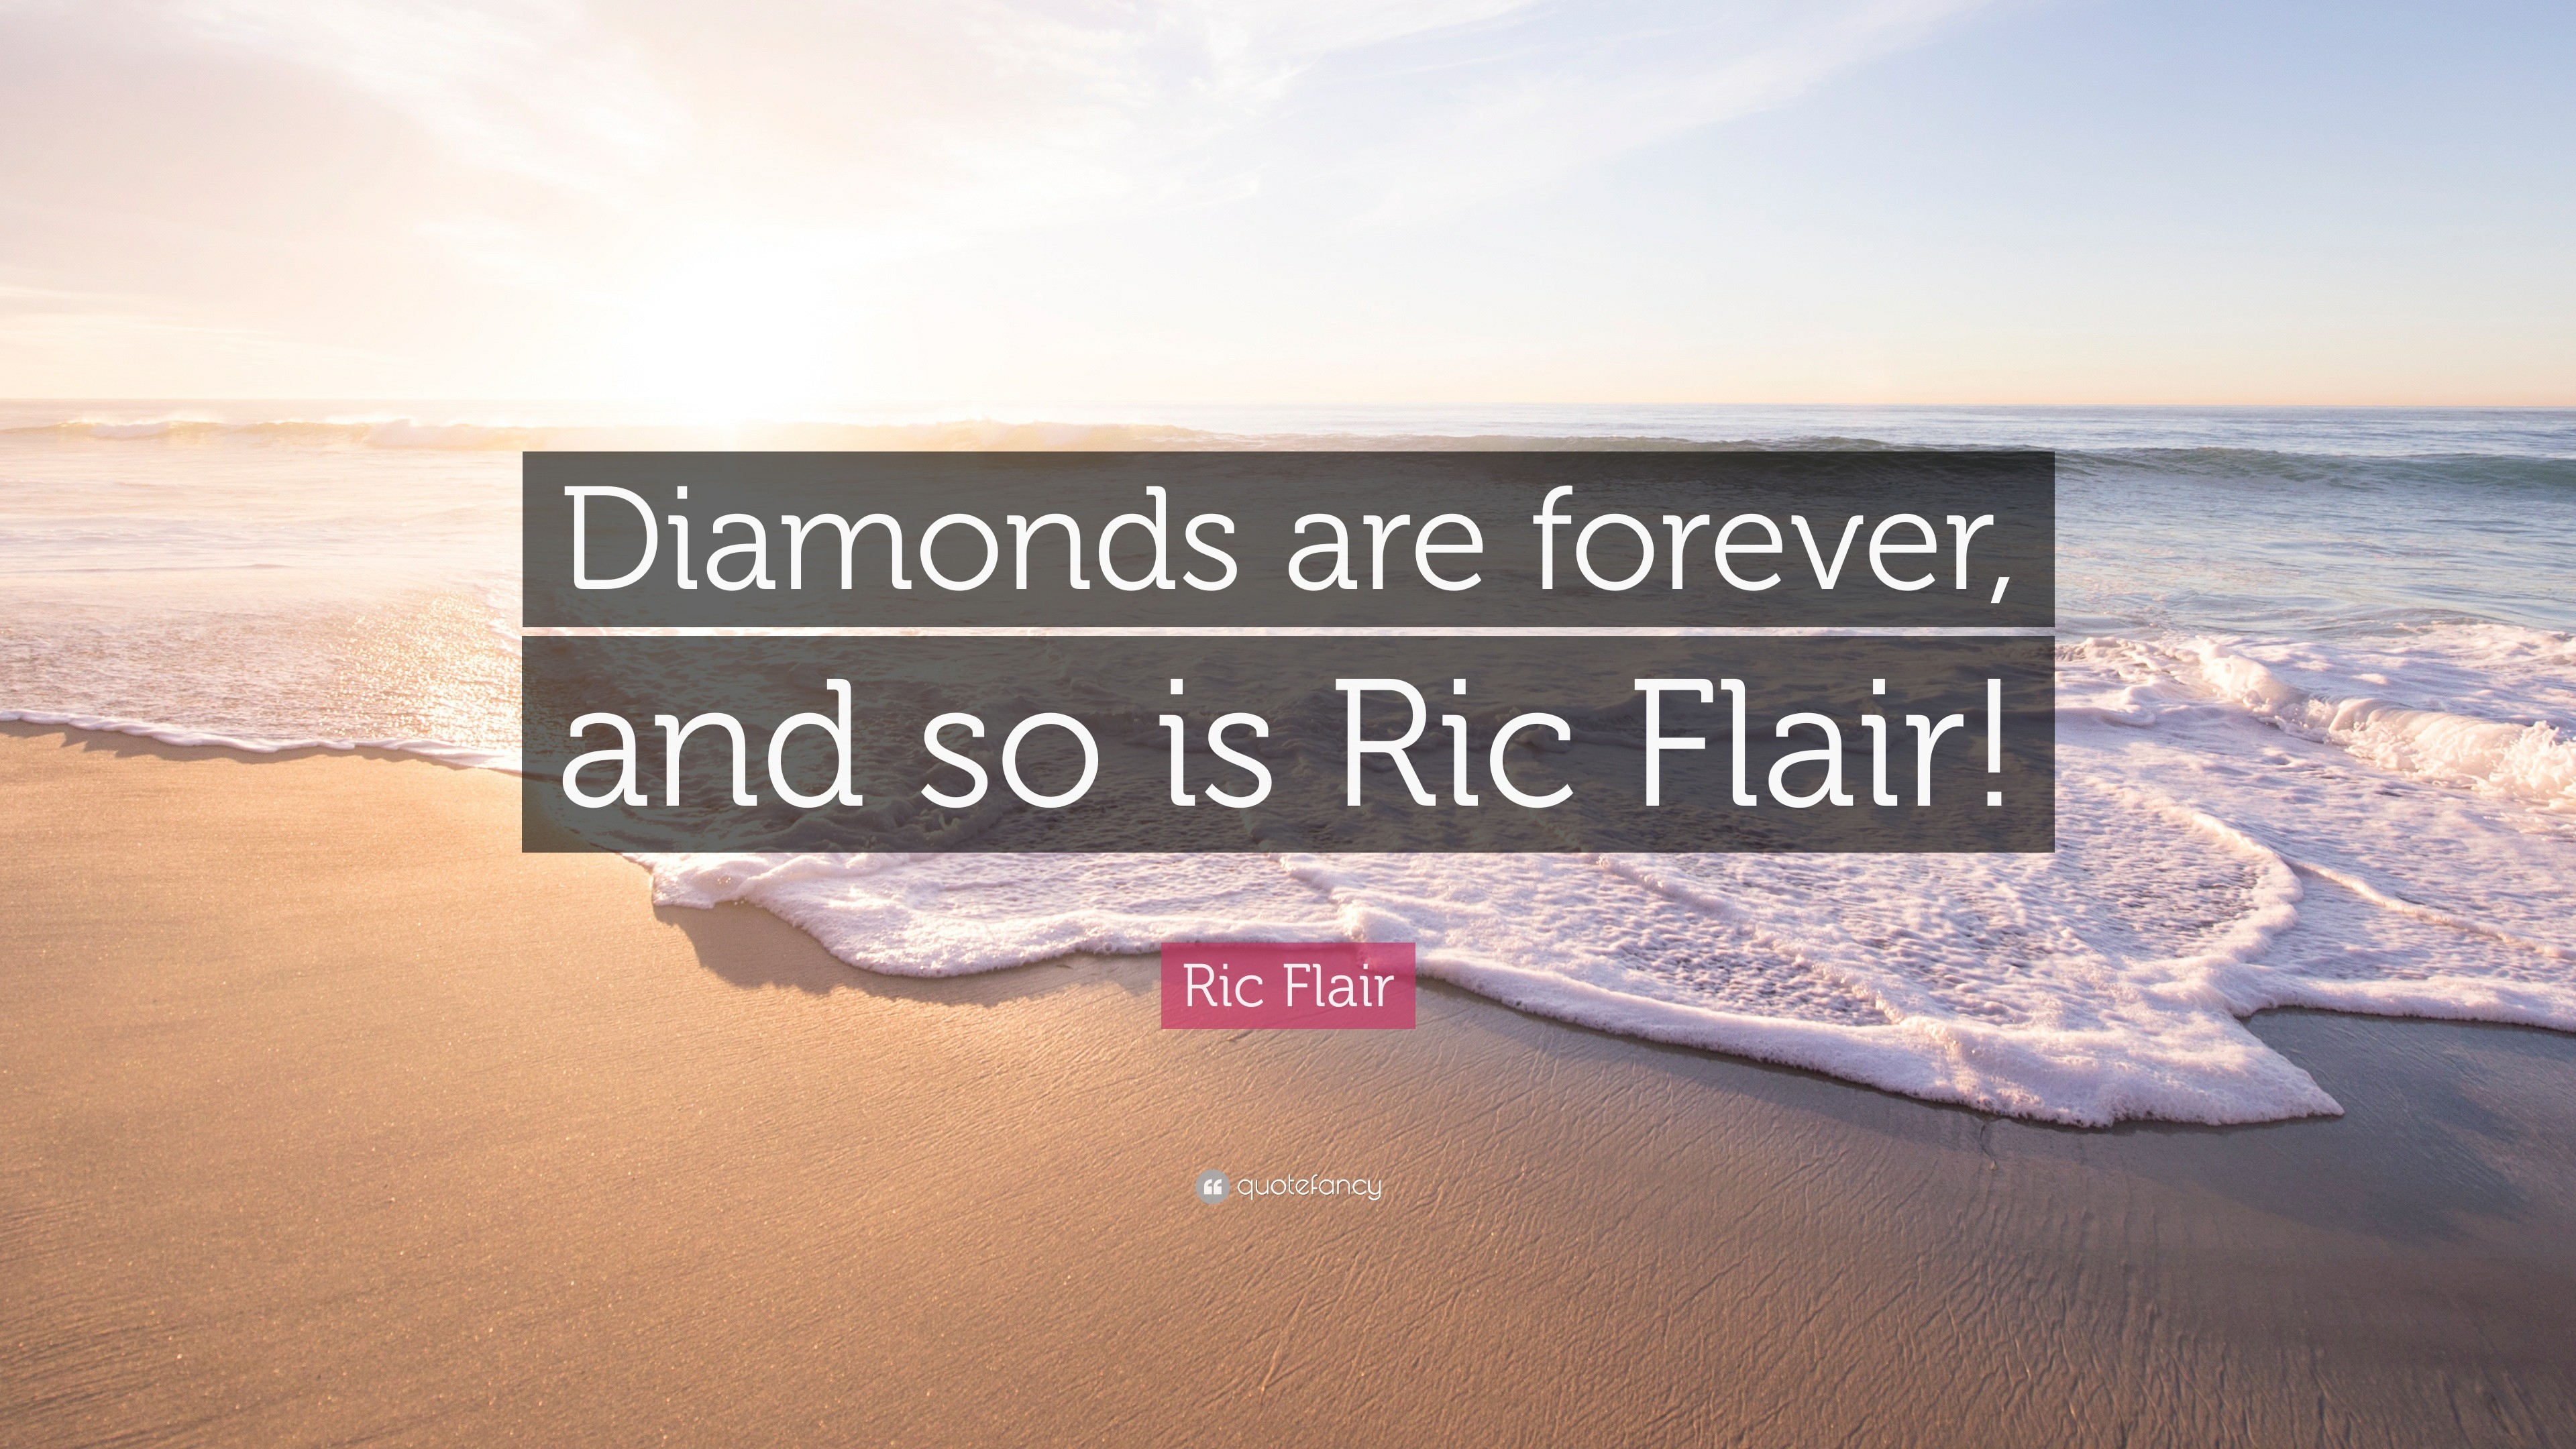 3840x2160 Ric Flair Quote: “Diamonds are forever, and so is Ric Flair!”